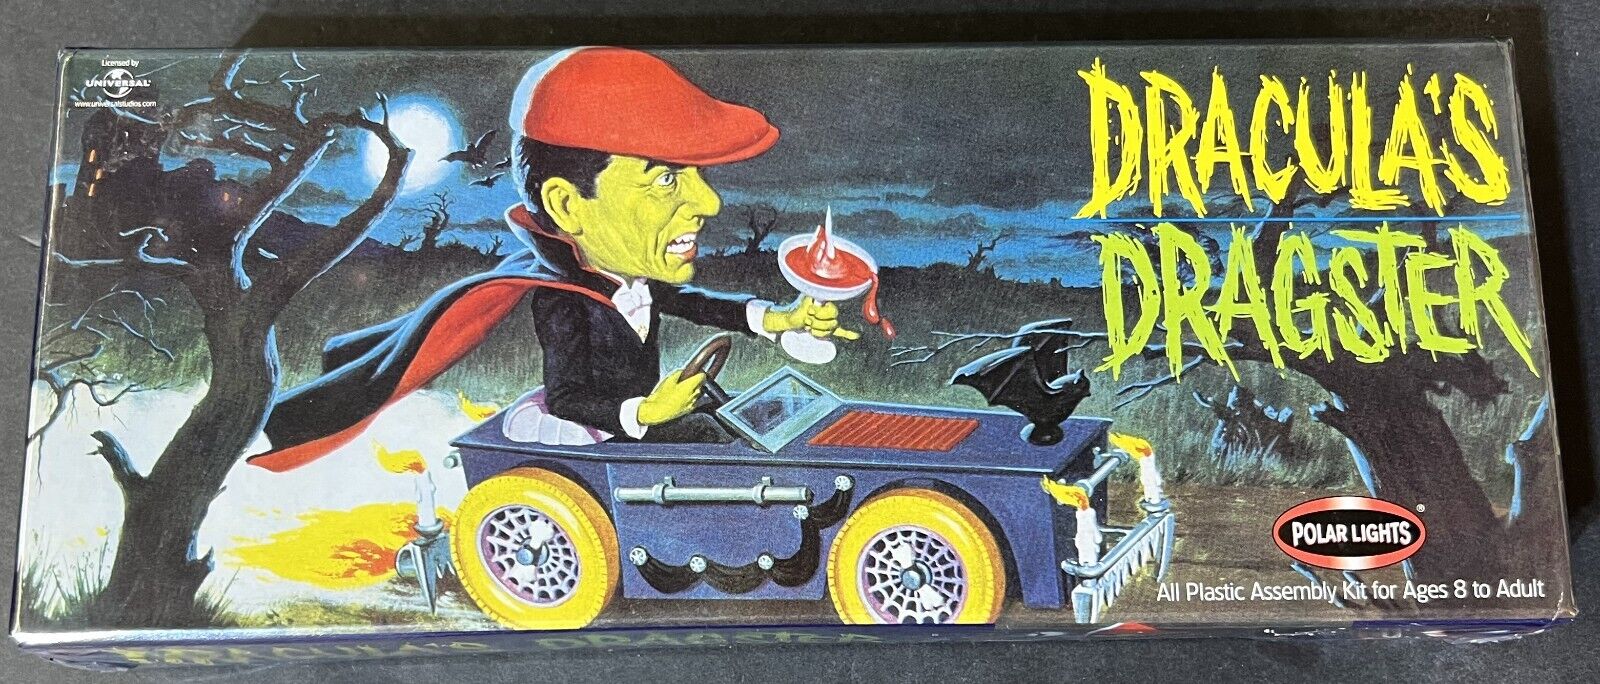 Dracula\'s Dragster (Sealed) (1999, Playing Mantis, #5026)